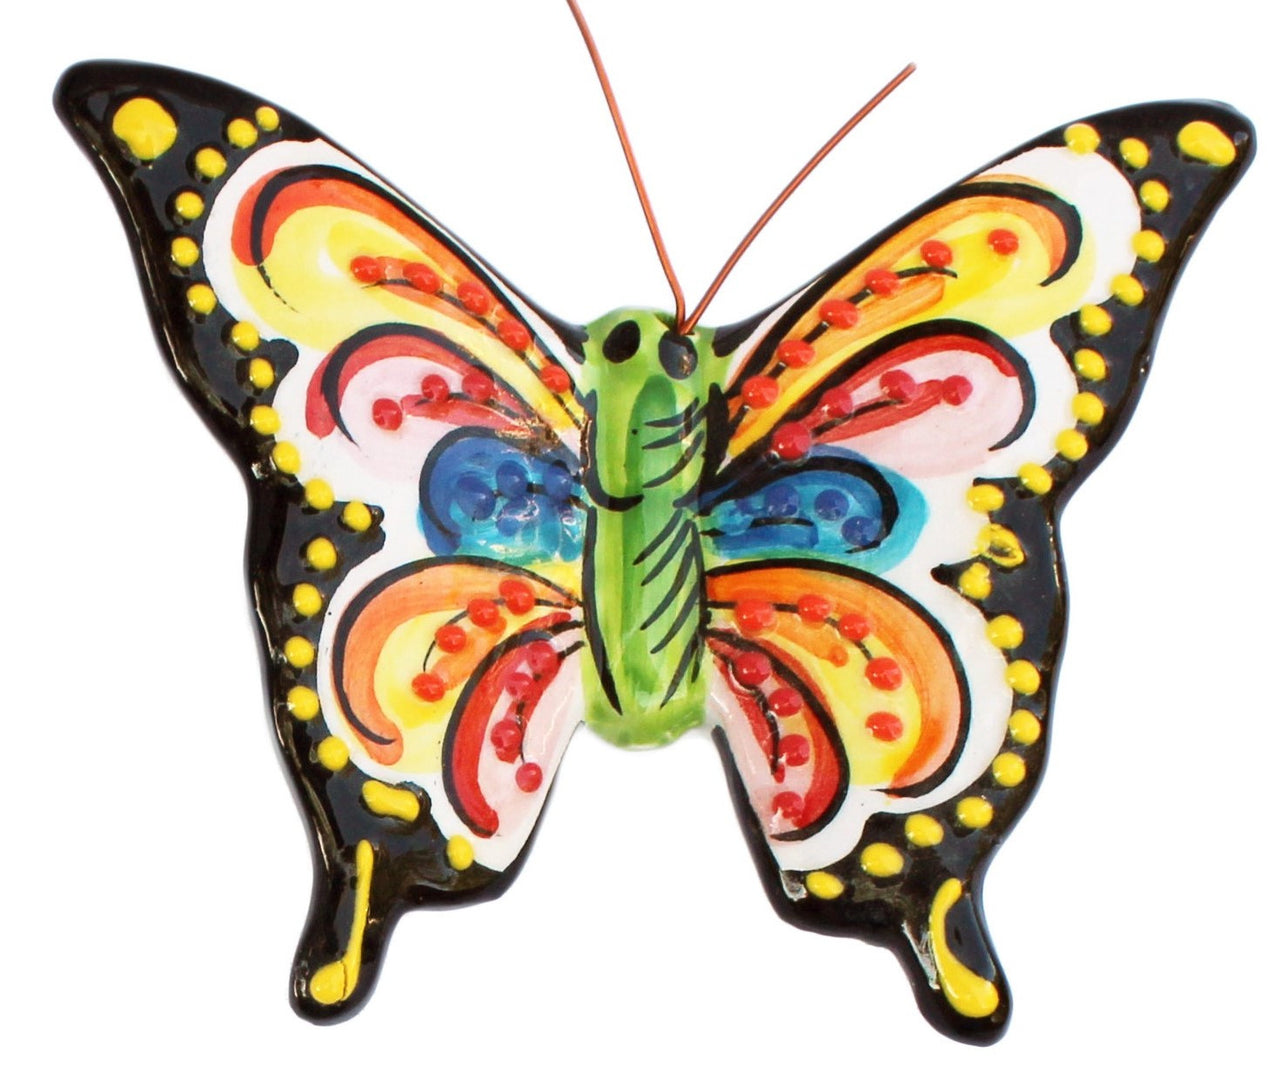 Set of 4 Small Ceramic Butterfly Wall Hangers (Tropical Colors) - Hand Painted From Spain